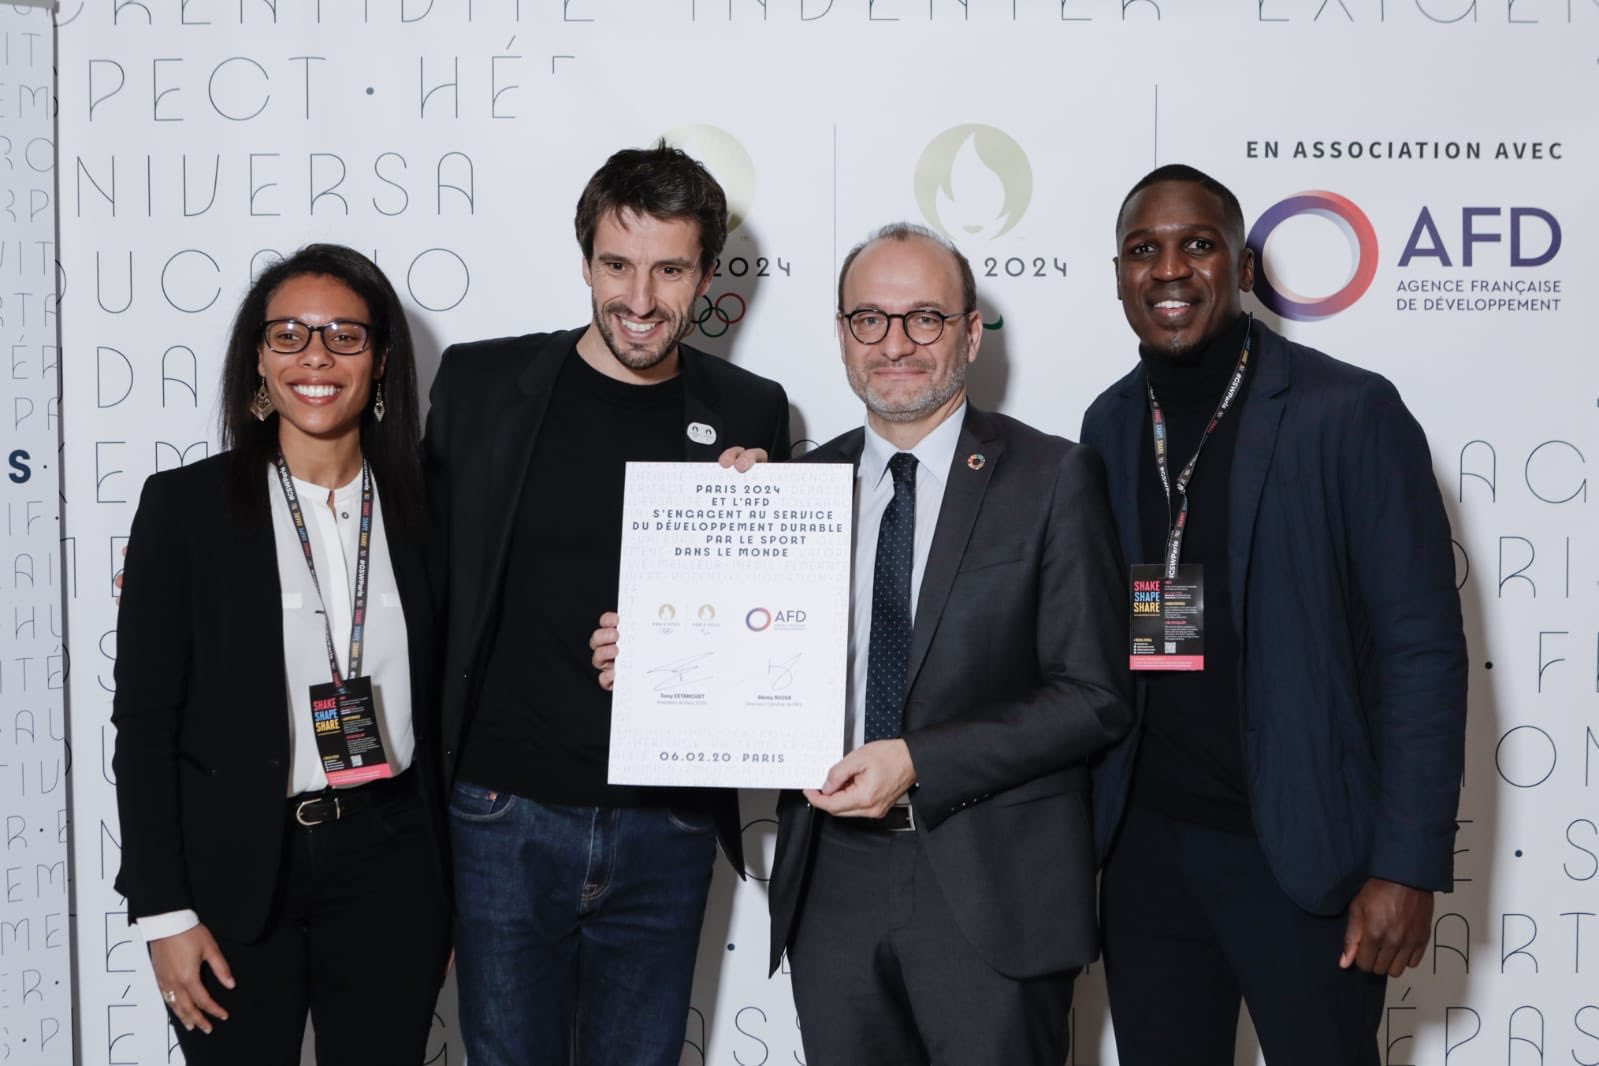 Paris 2024 signed an agreement with the French Development Agency ©Twitter